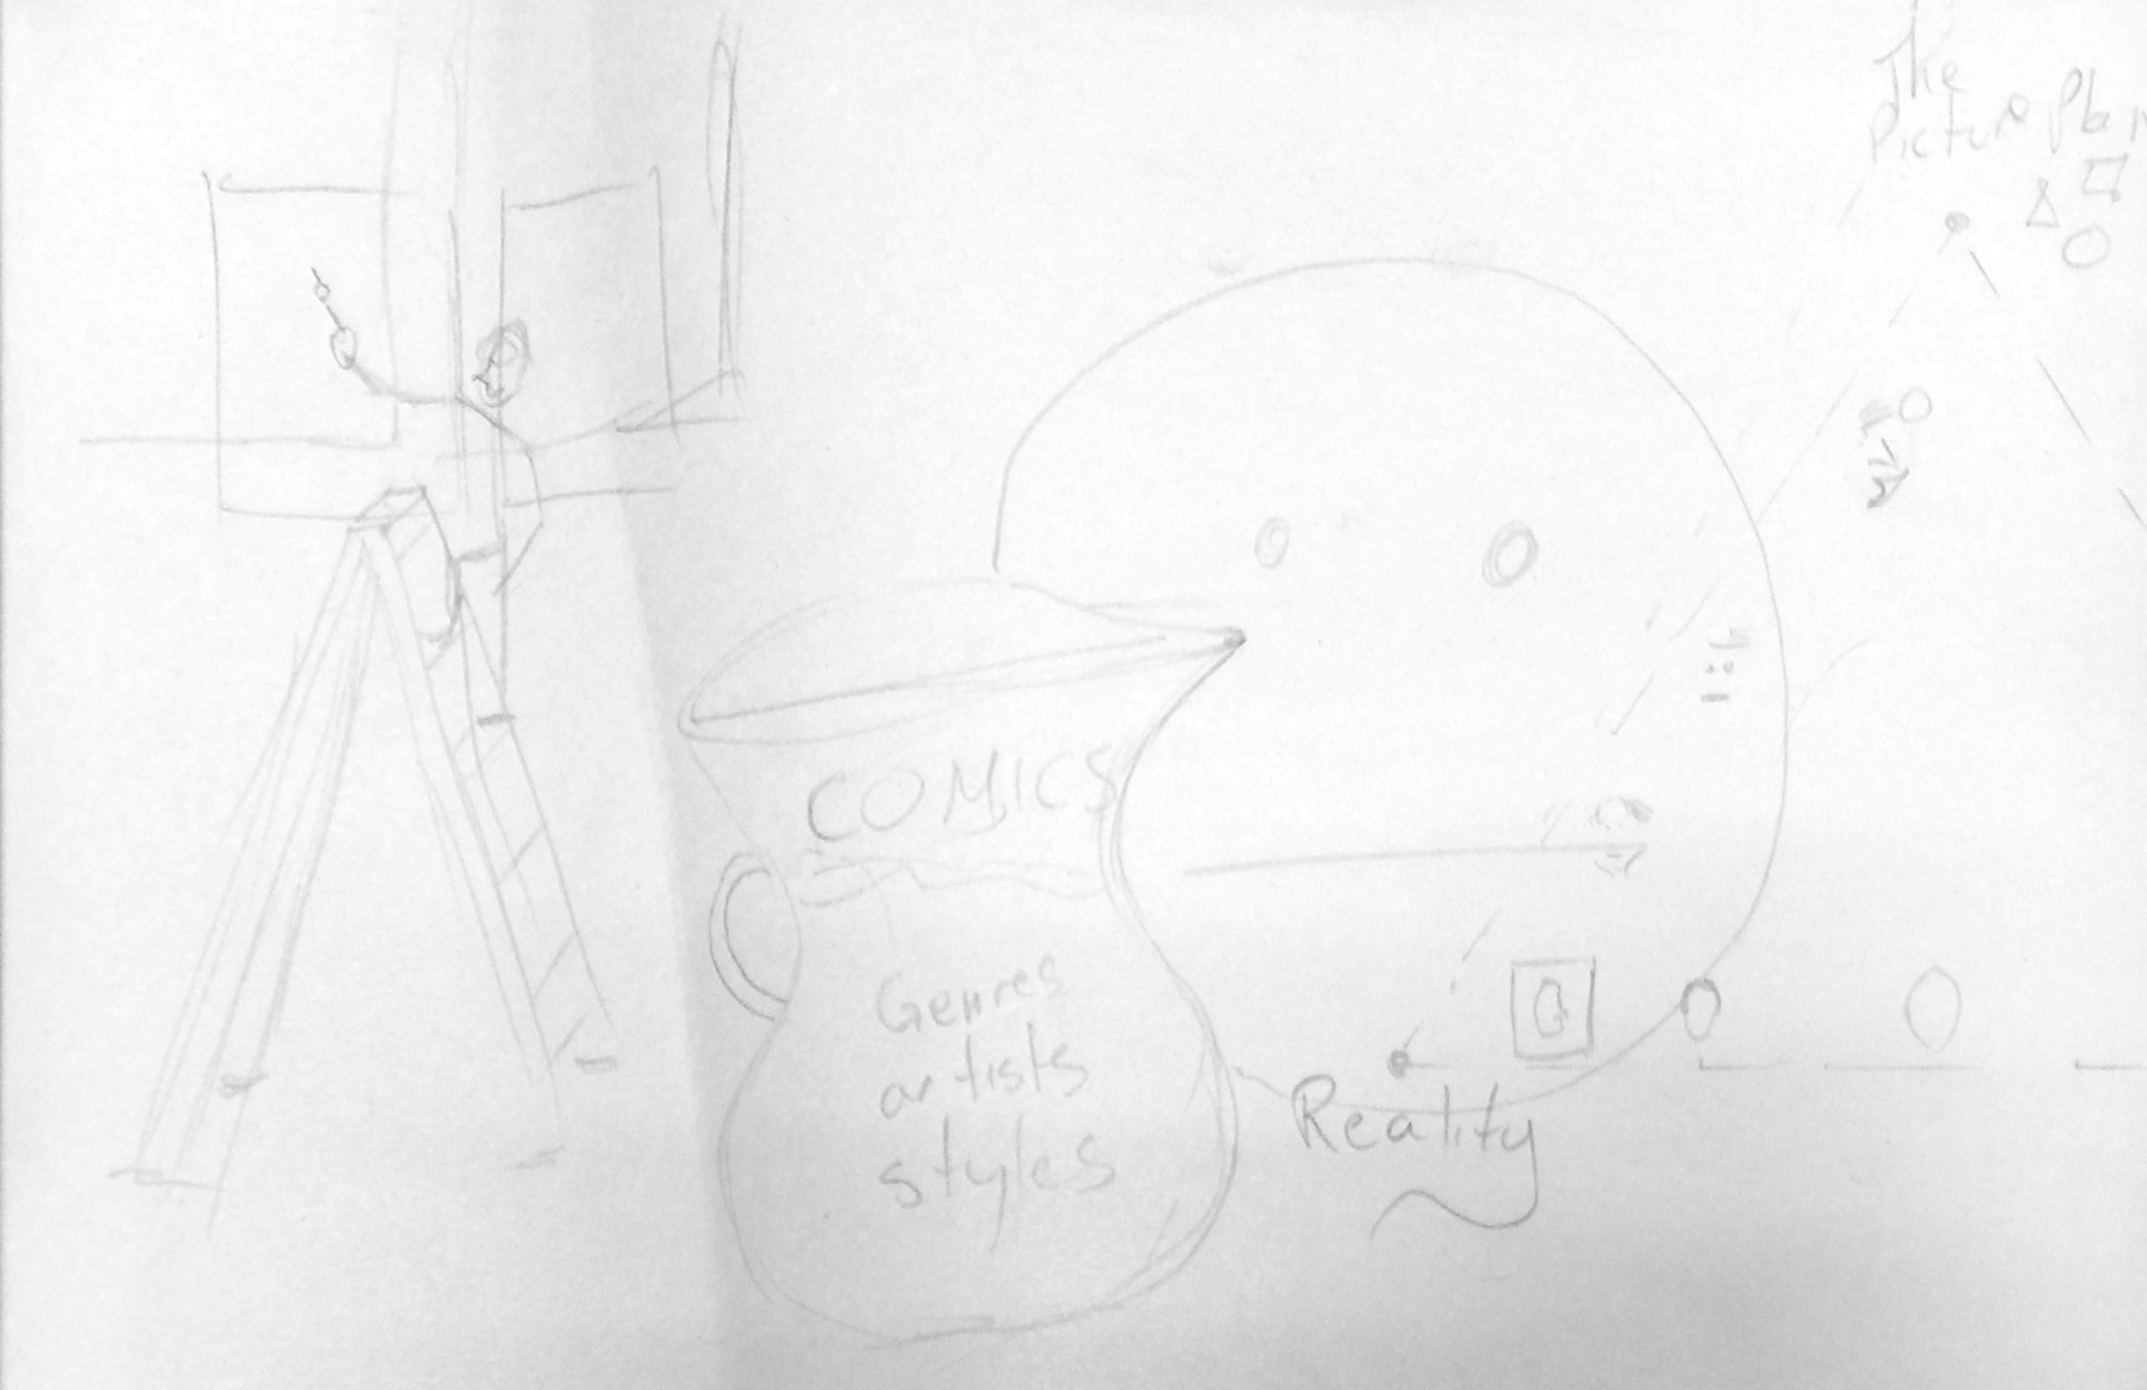 An early sketch for the Deleuze Plane image, with a larger pitcher and emoji face behind it